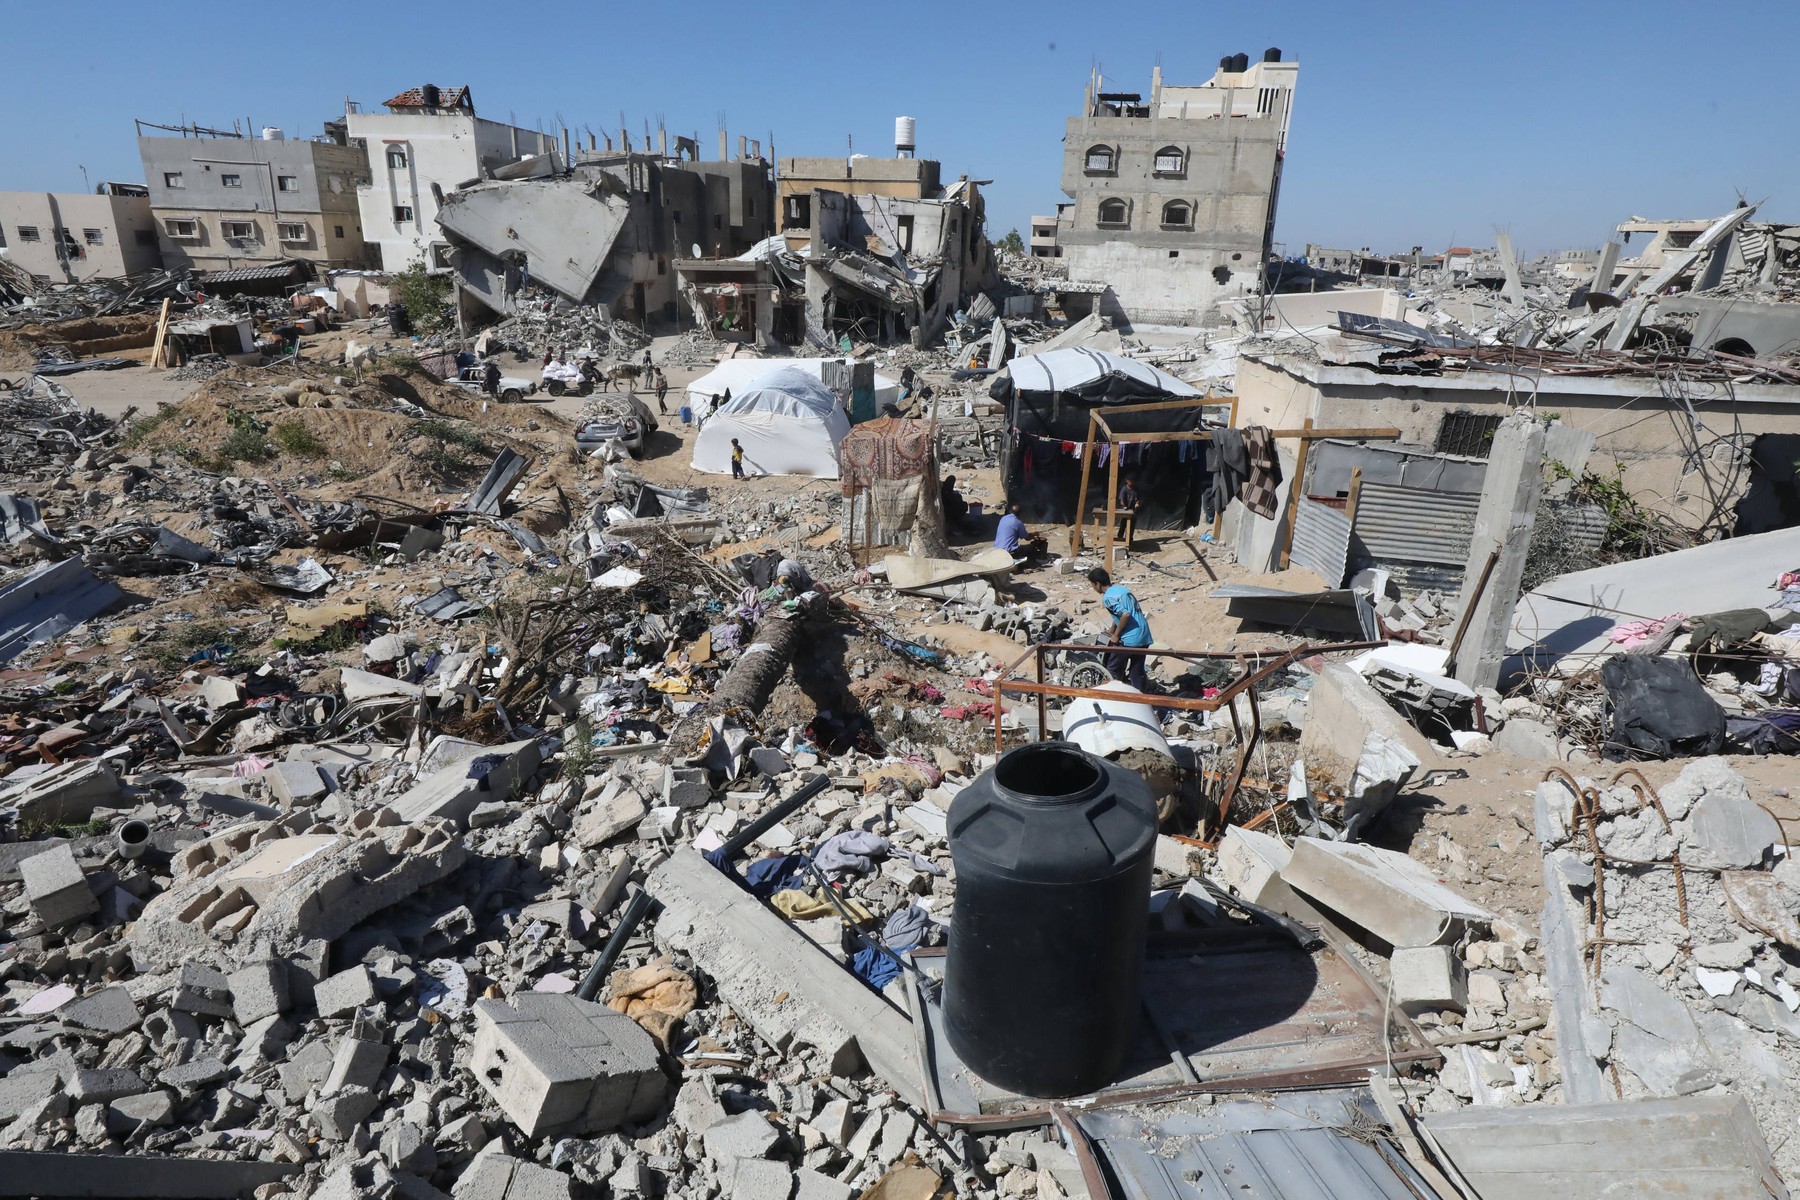 Internally displaced Palestinians, carrying their belongings, set up tents on the ruins of their homes after the Israeli army asked them to evacuate from the city of Rafah, in Khan Yunis, southern Gaza Strip, 07 May 2024. The Israel Defence Forces (IDF) on 06 May called on residents of eastern Rafah to 'temporarily' evacuate to an expanded humanitarian area. On 07 May the IDF stated that its ground troops began an overnight operation targeting Hamas militants and infrastructure within specific areas of eastern Rafah, taking operational control of the Gazan side of the Rafah crossing based on intelligence information. More than 34,600 Palestinians and over 1,455 Israelis have been killed, according to the Palestinian Health Ministry and the IDF, since Hamas militants launched an attack against Israel from the Gaza Strip on 07 October 2023, and the Israeli operations in Gaza and the West Bank which followed it. Photo by Omar Ashtawy apaimages//APAIMAGES_APA0044/Credit:Omar Ashtawy  apaimages/SIPA/2405072201,Image: 870974795, License: Rights-managed, Restrictions: , Model Release: no, Credit line: Omar Ashtawy  apaimages / Sipa Press / Profimedia